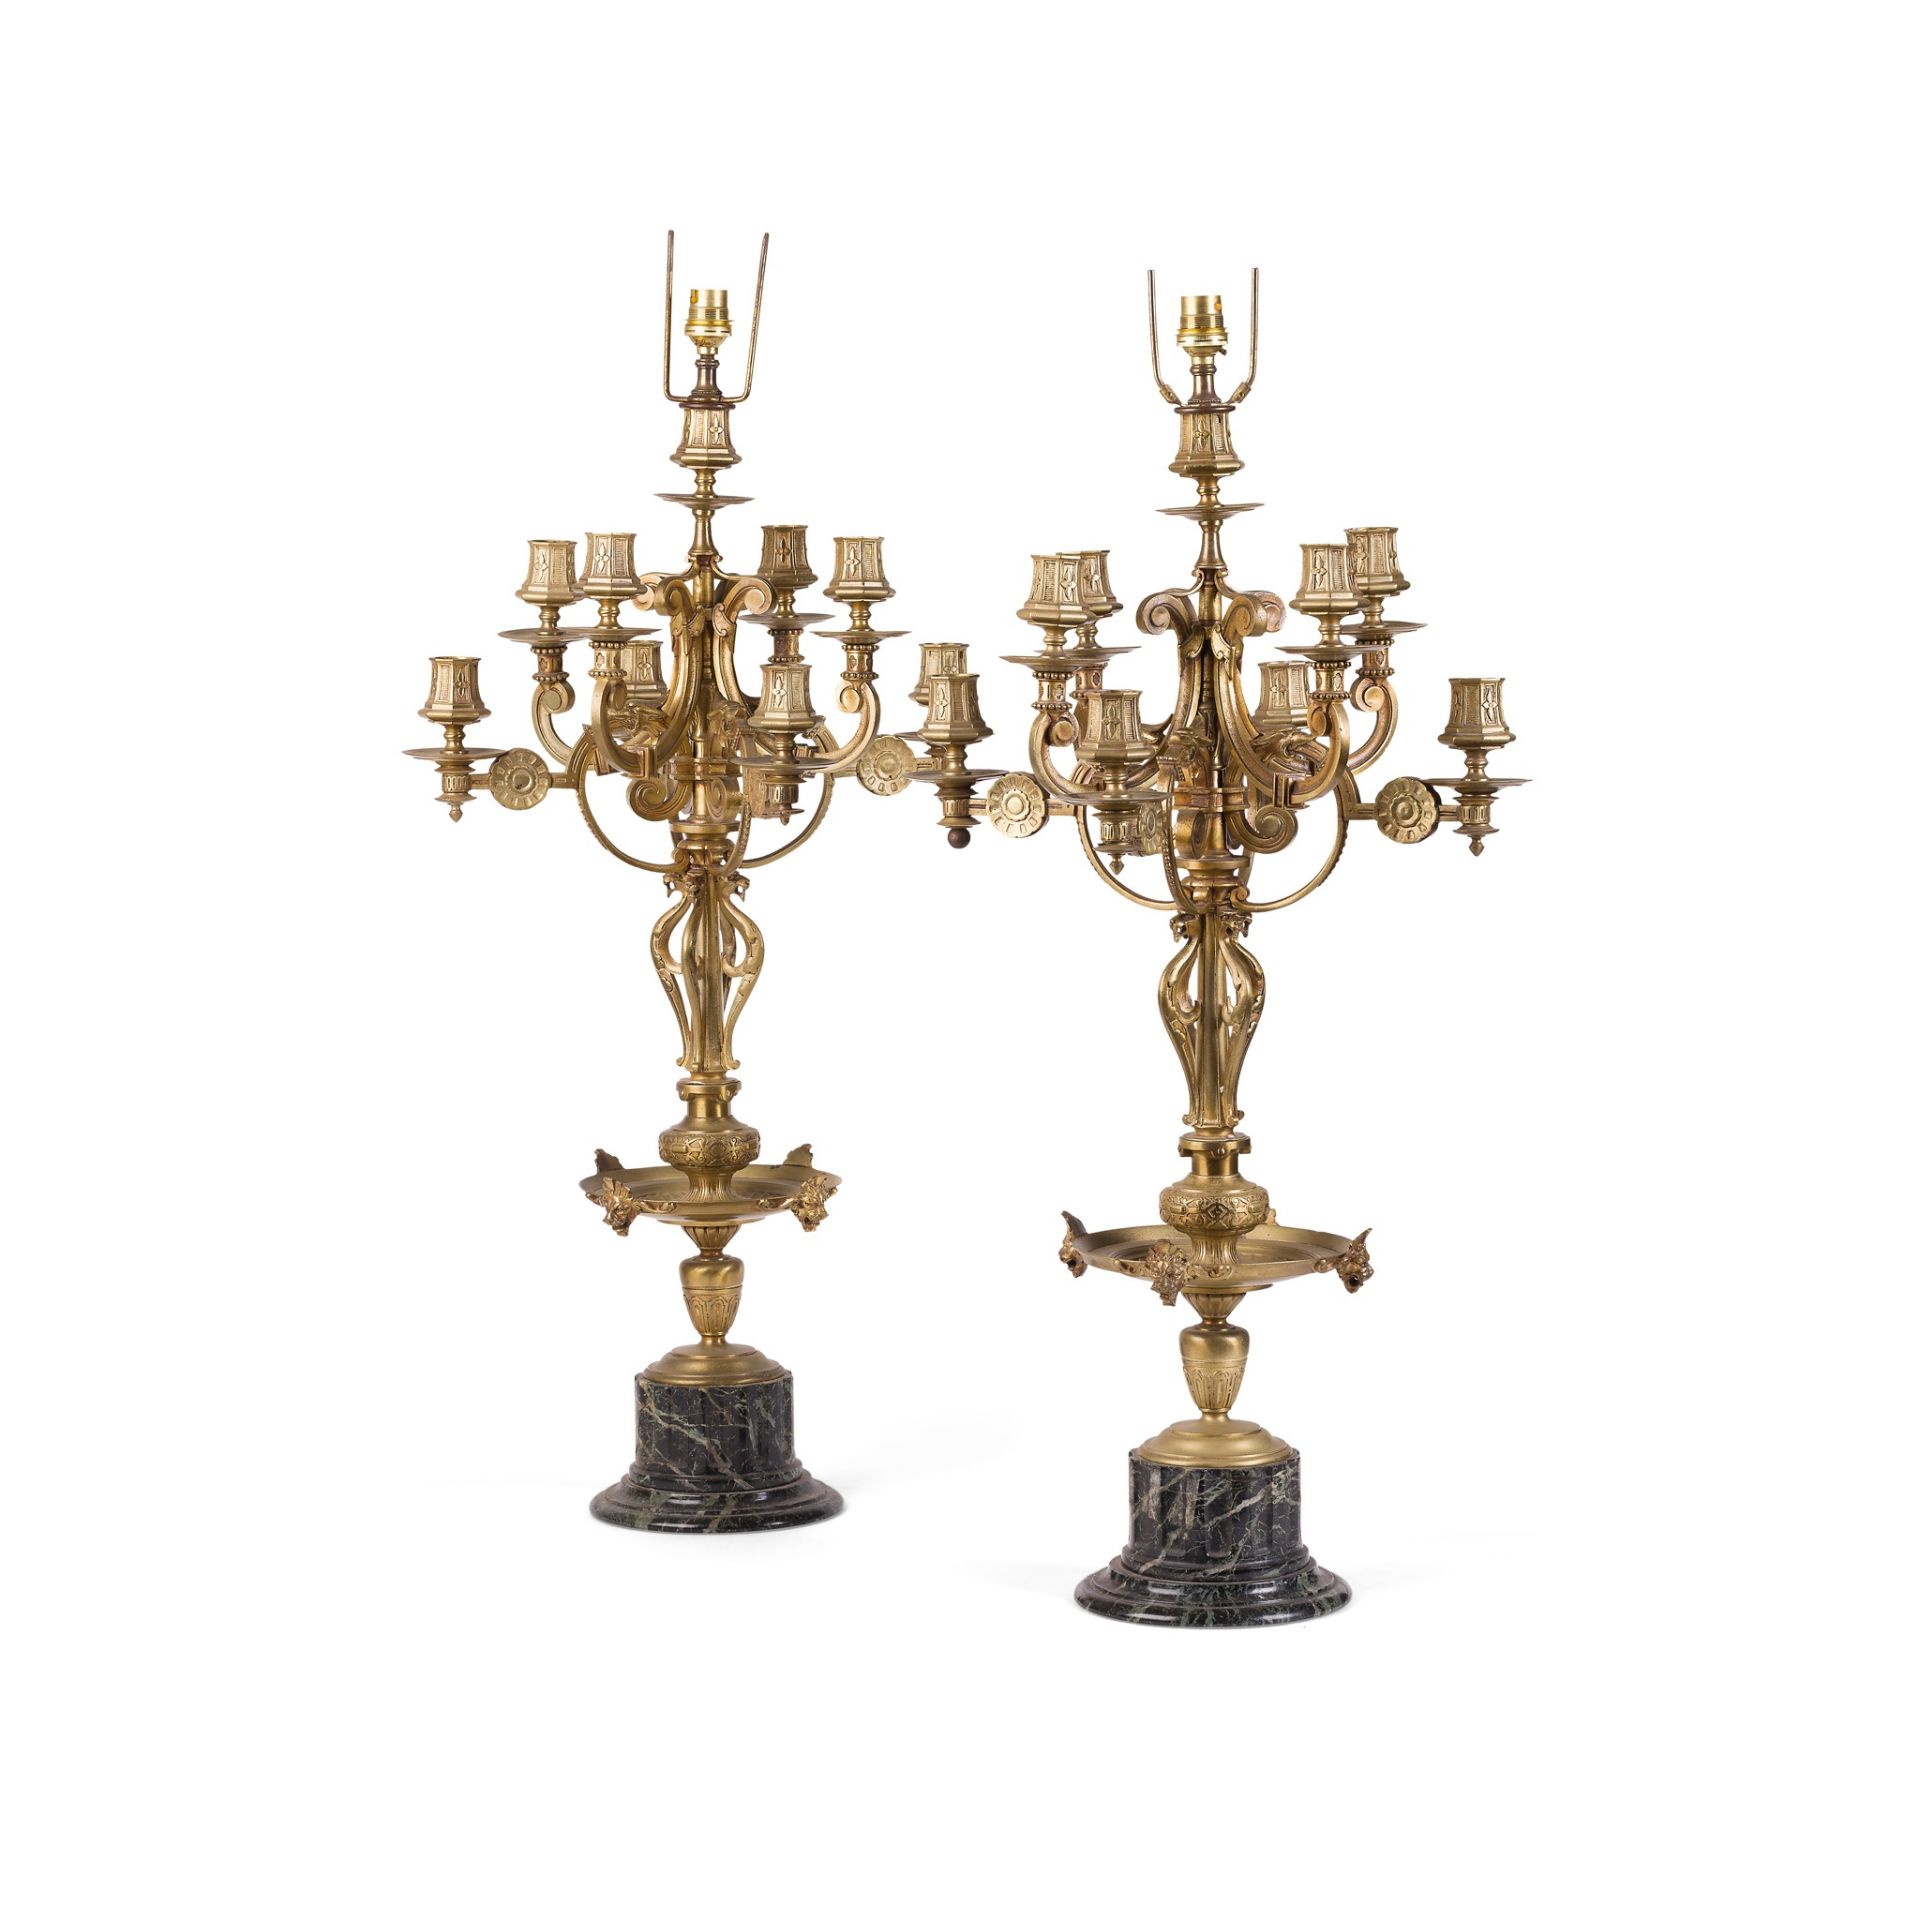 PAIR OF LARGE PATINATED METAL CANDELABRA LAMPS 19TH CENTURY - Image 2 of 2